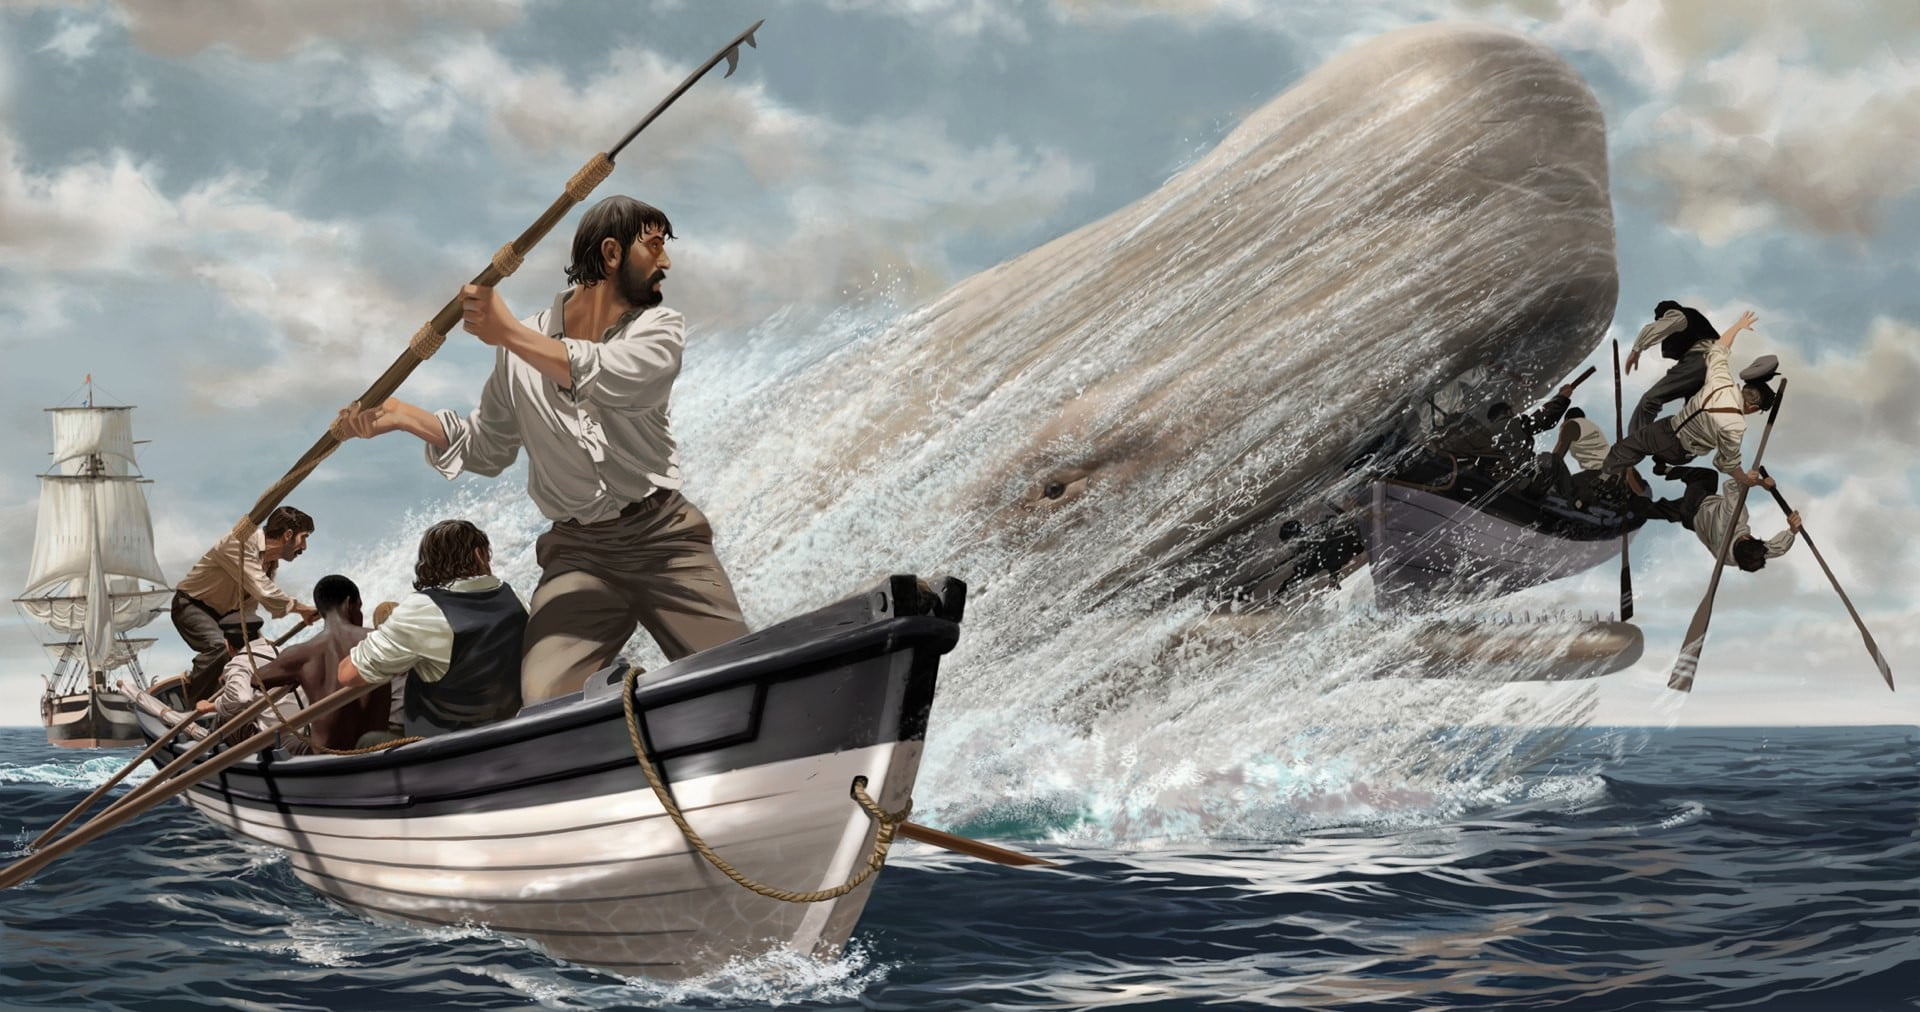 How moby dick helped man u understand nature